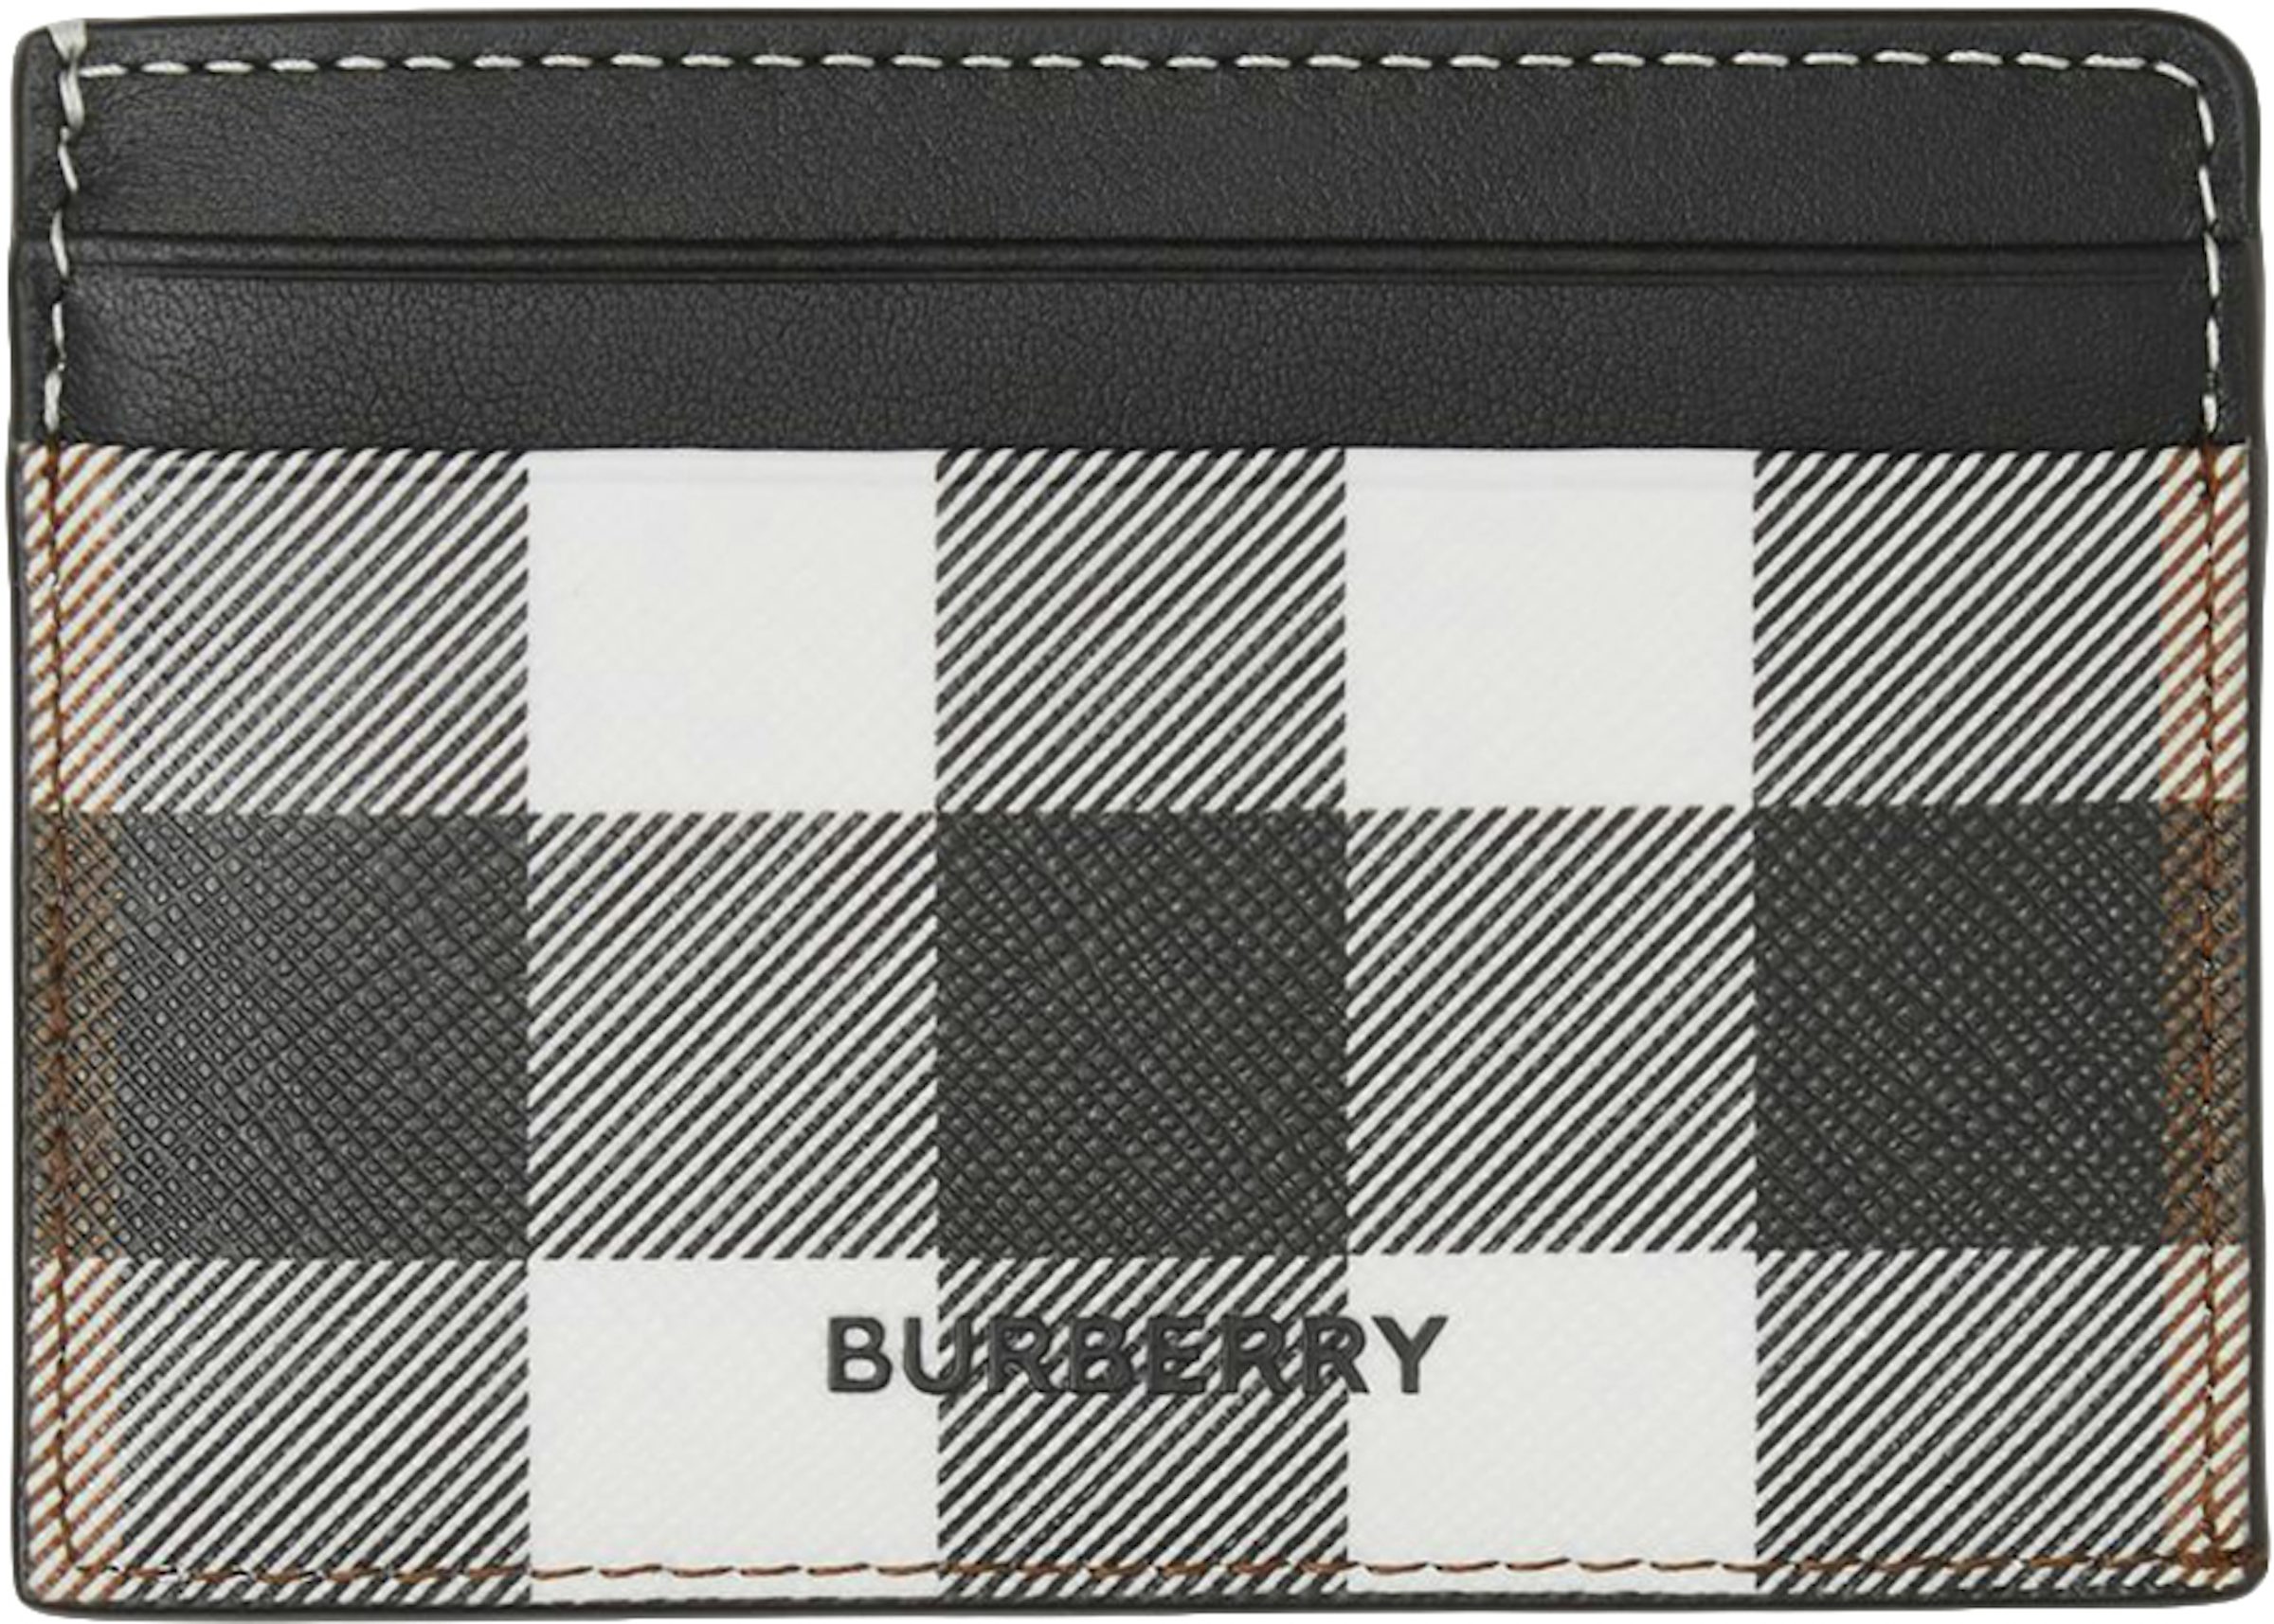 Burberry Check Trim Bifold Wallet, Blue, One Size for Men